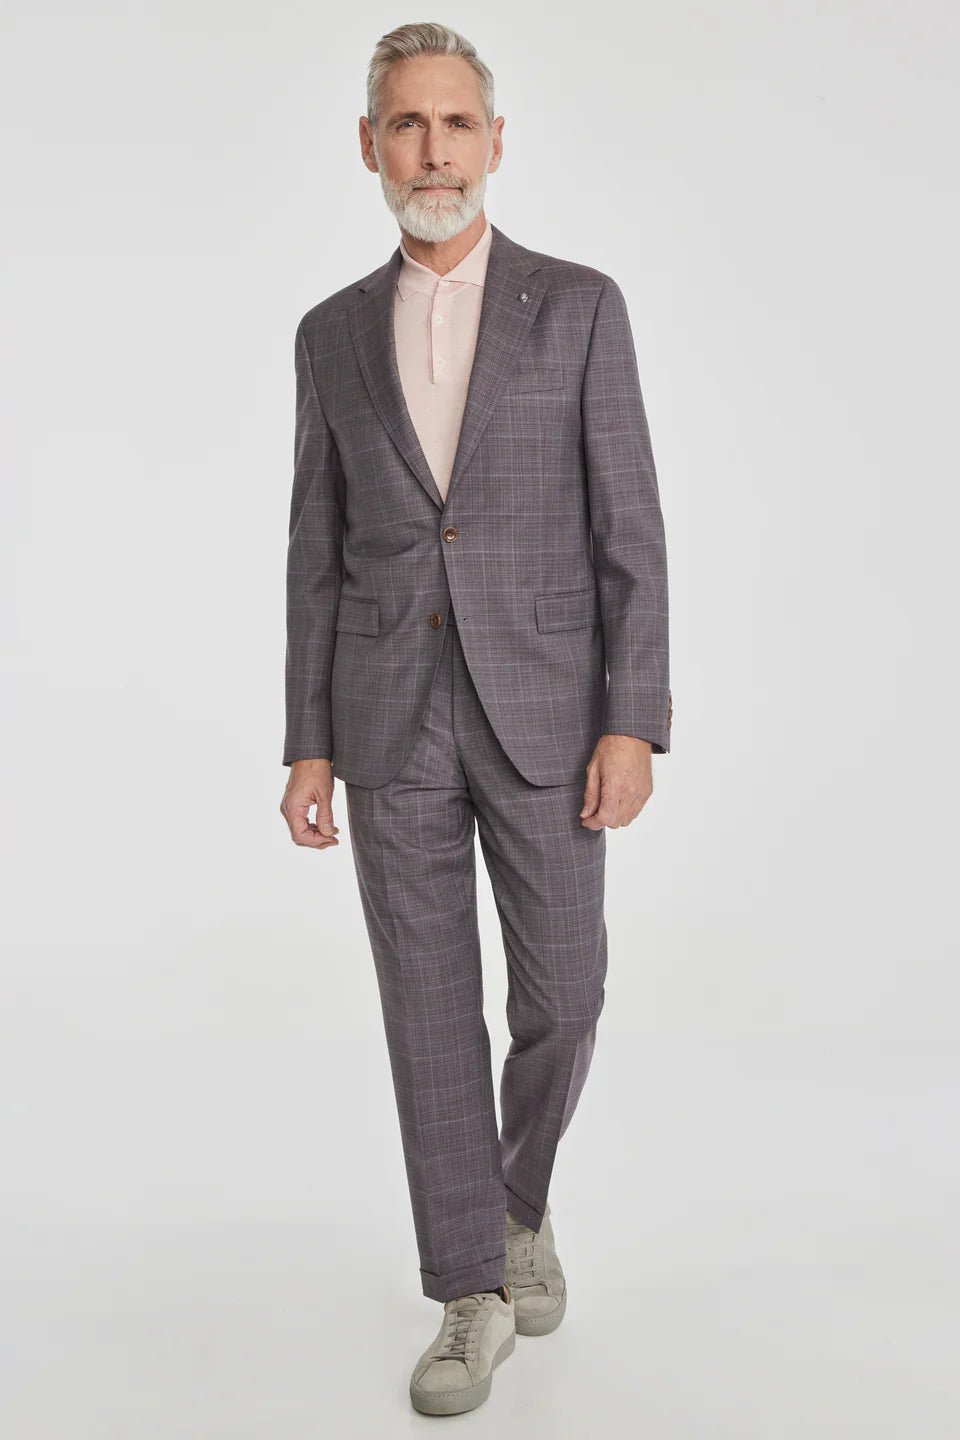 This Esprit&nbsp;suit featuring a soft plum tonal windowpane crafted from super 120's wool woven in Italy. The perfect year round weight meets stretch comfort.